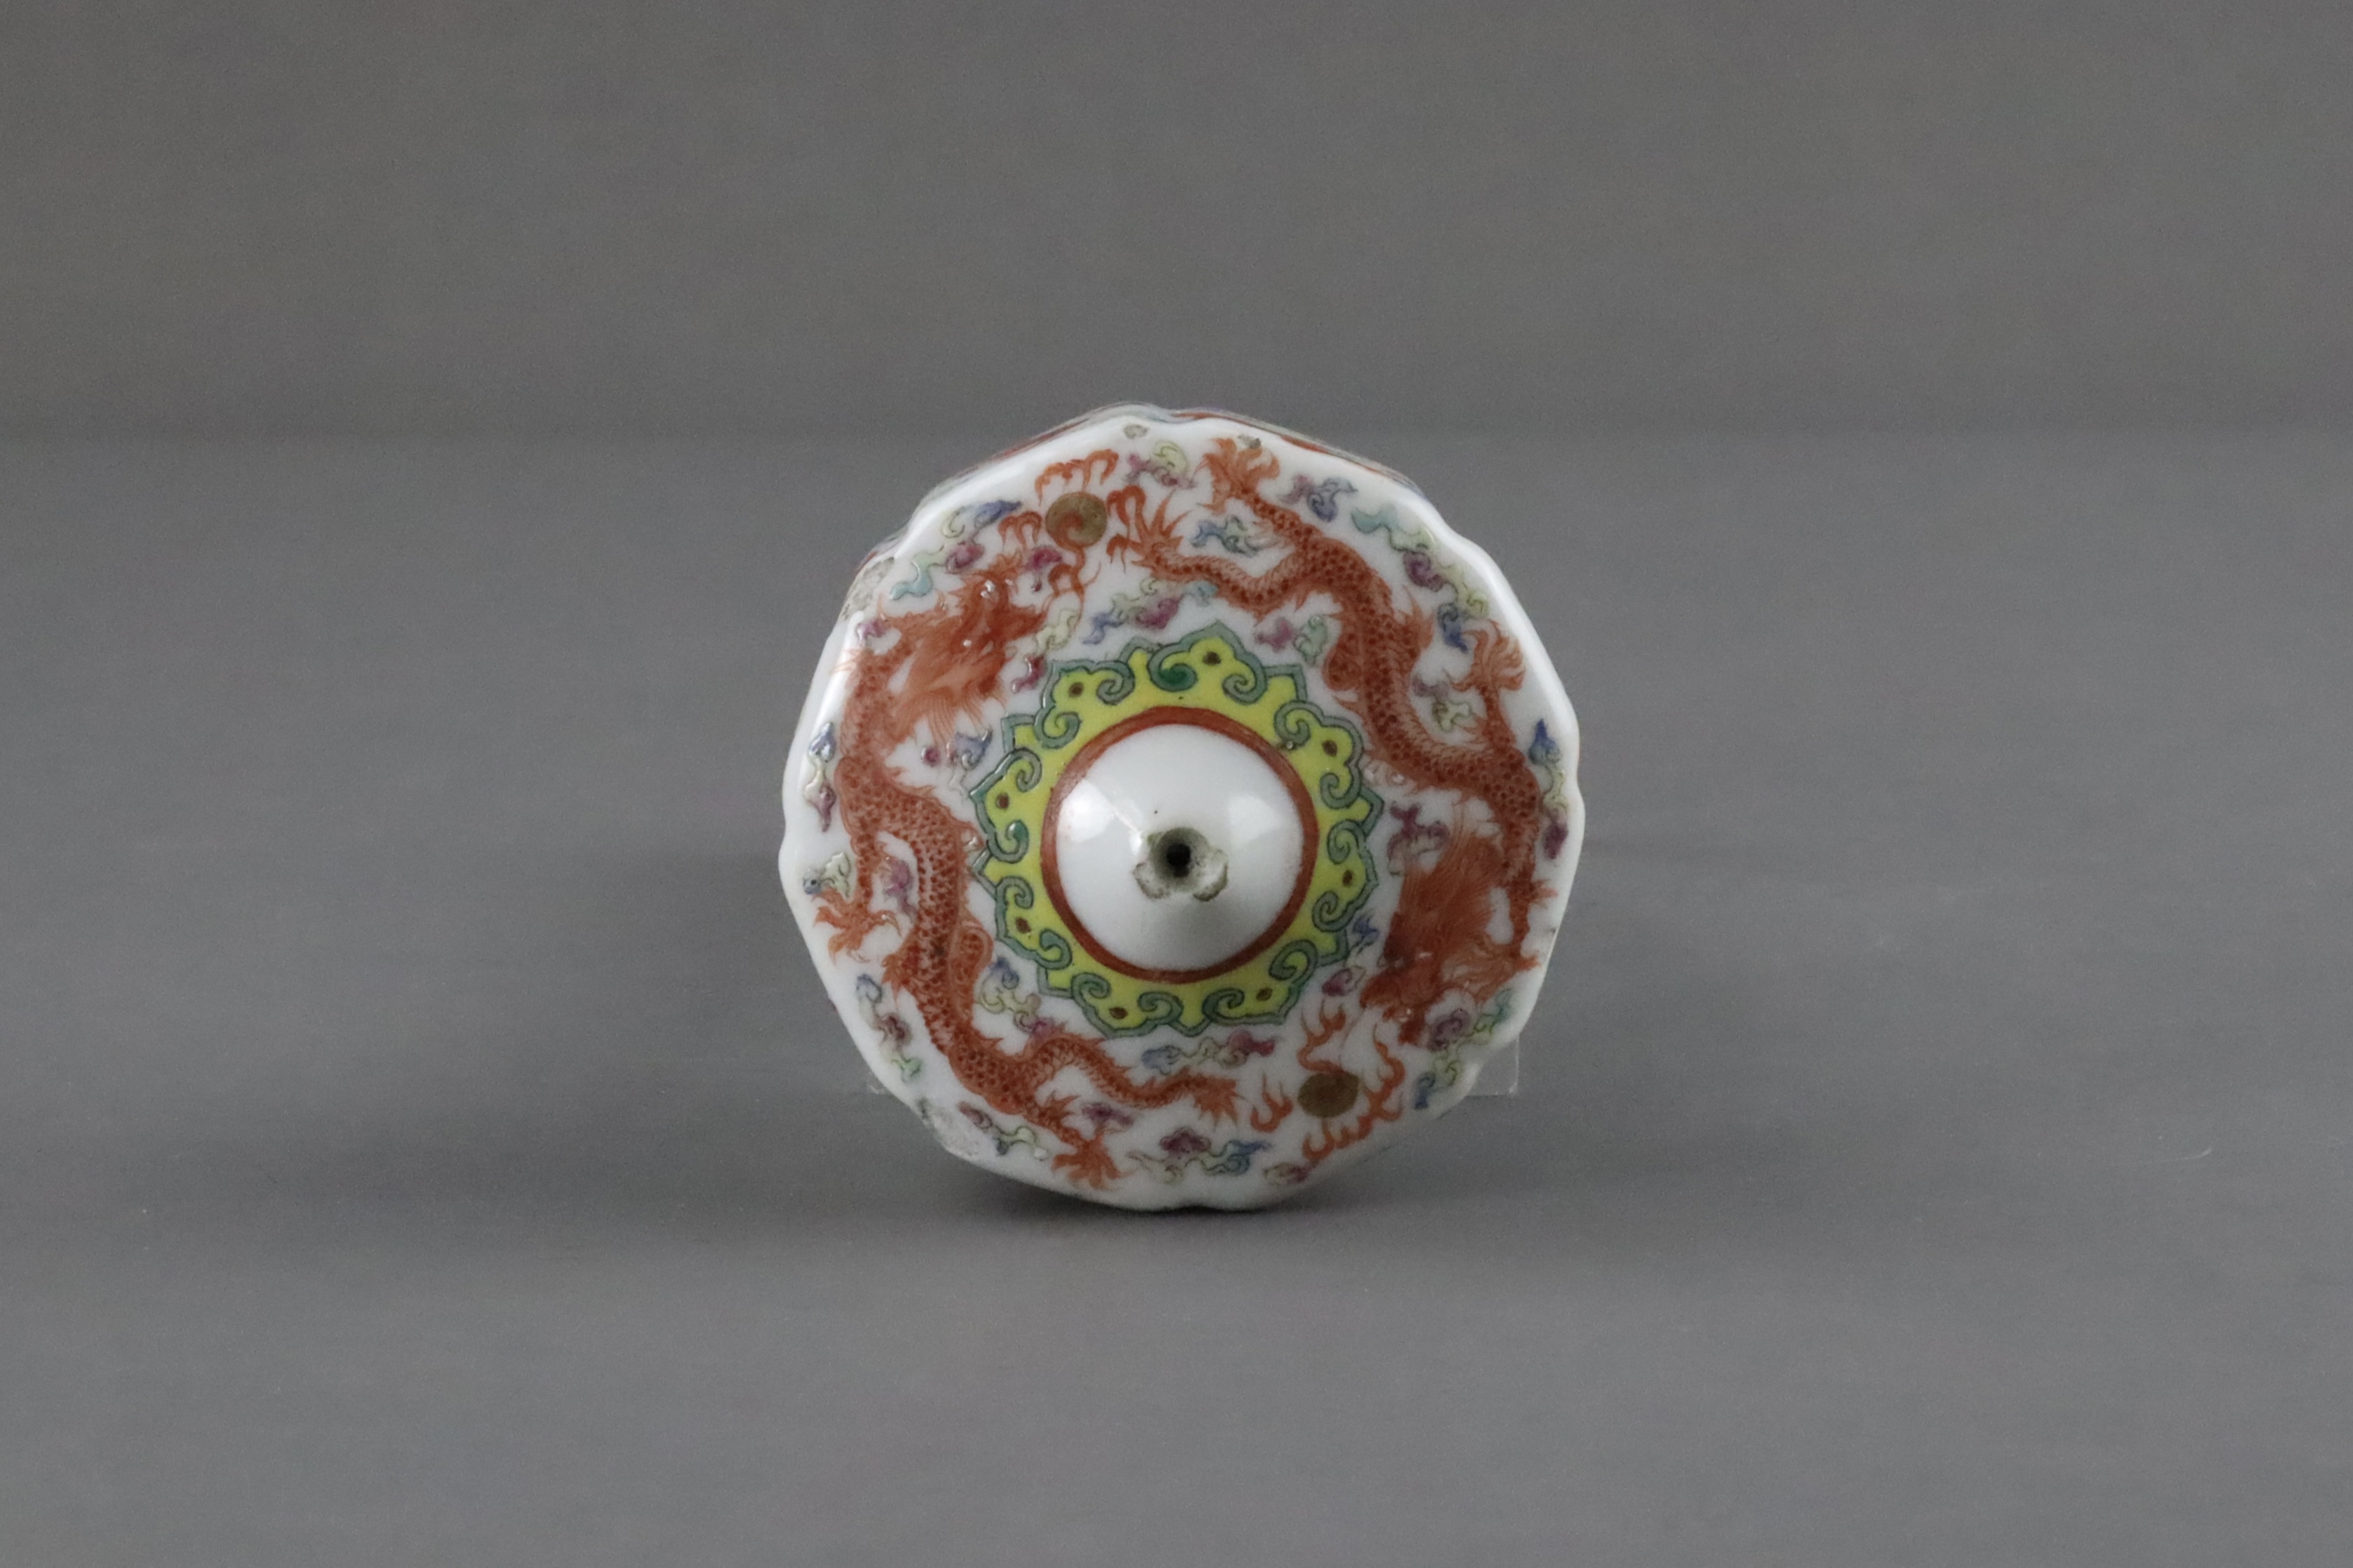 A Rare Porcelain Opium Pipe Bowl, four character mark, 19th century, - Image 4 of 8